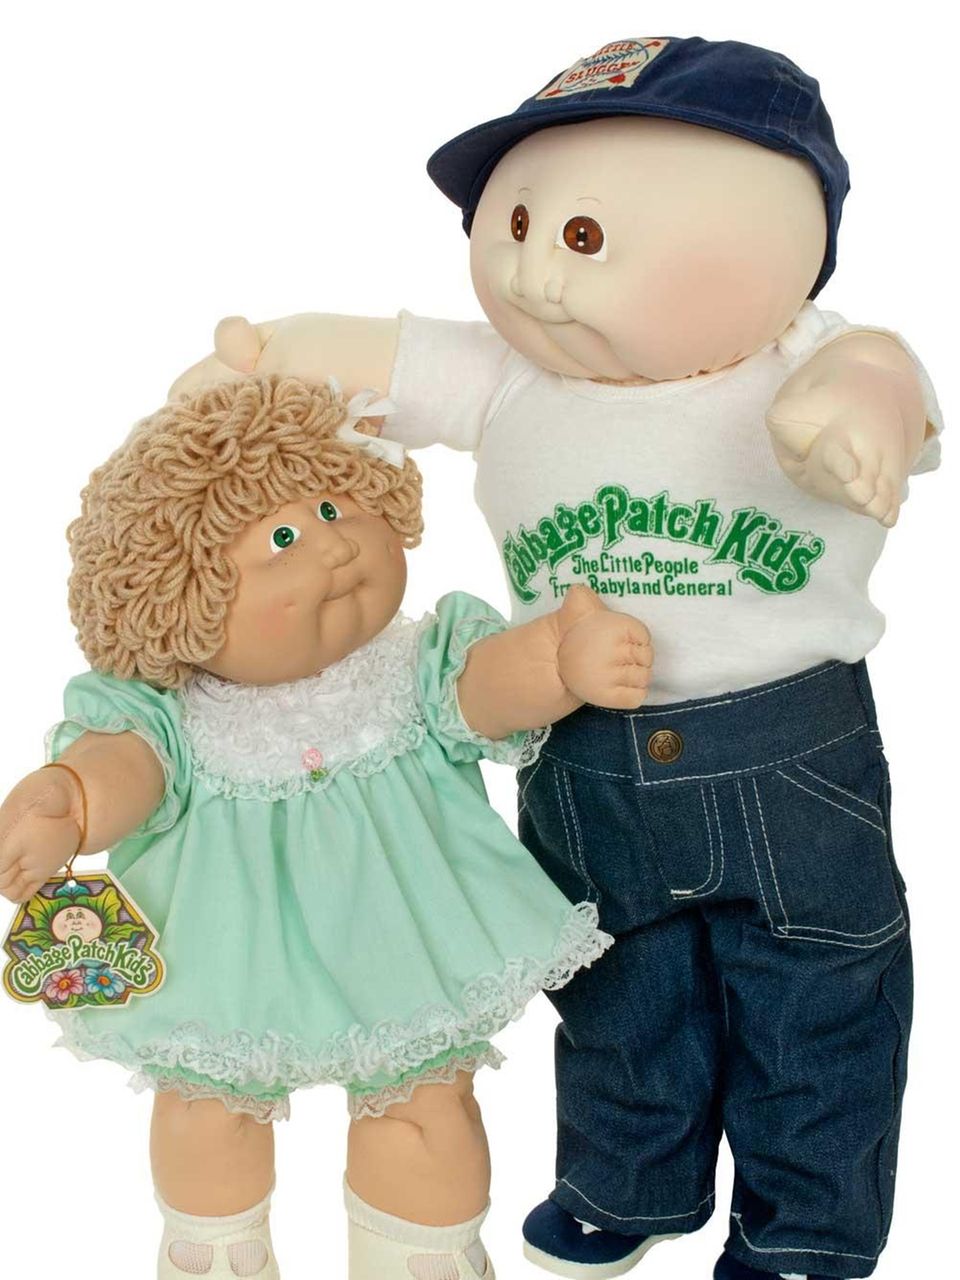 preemie cabbage patch doll 1985